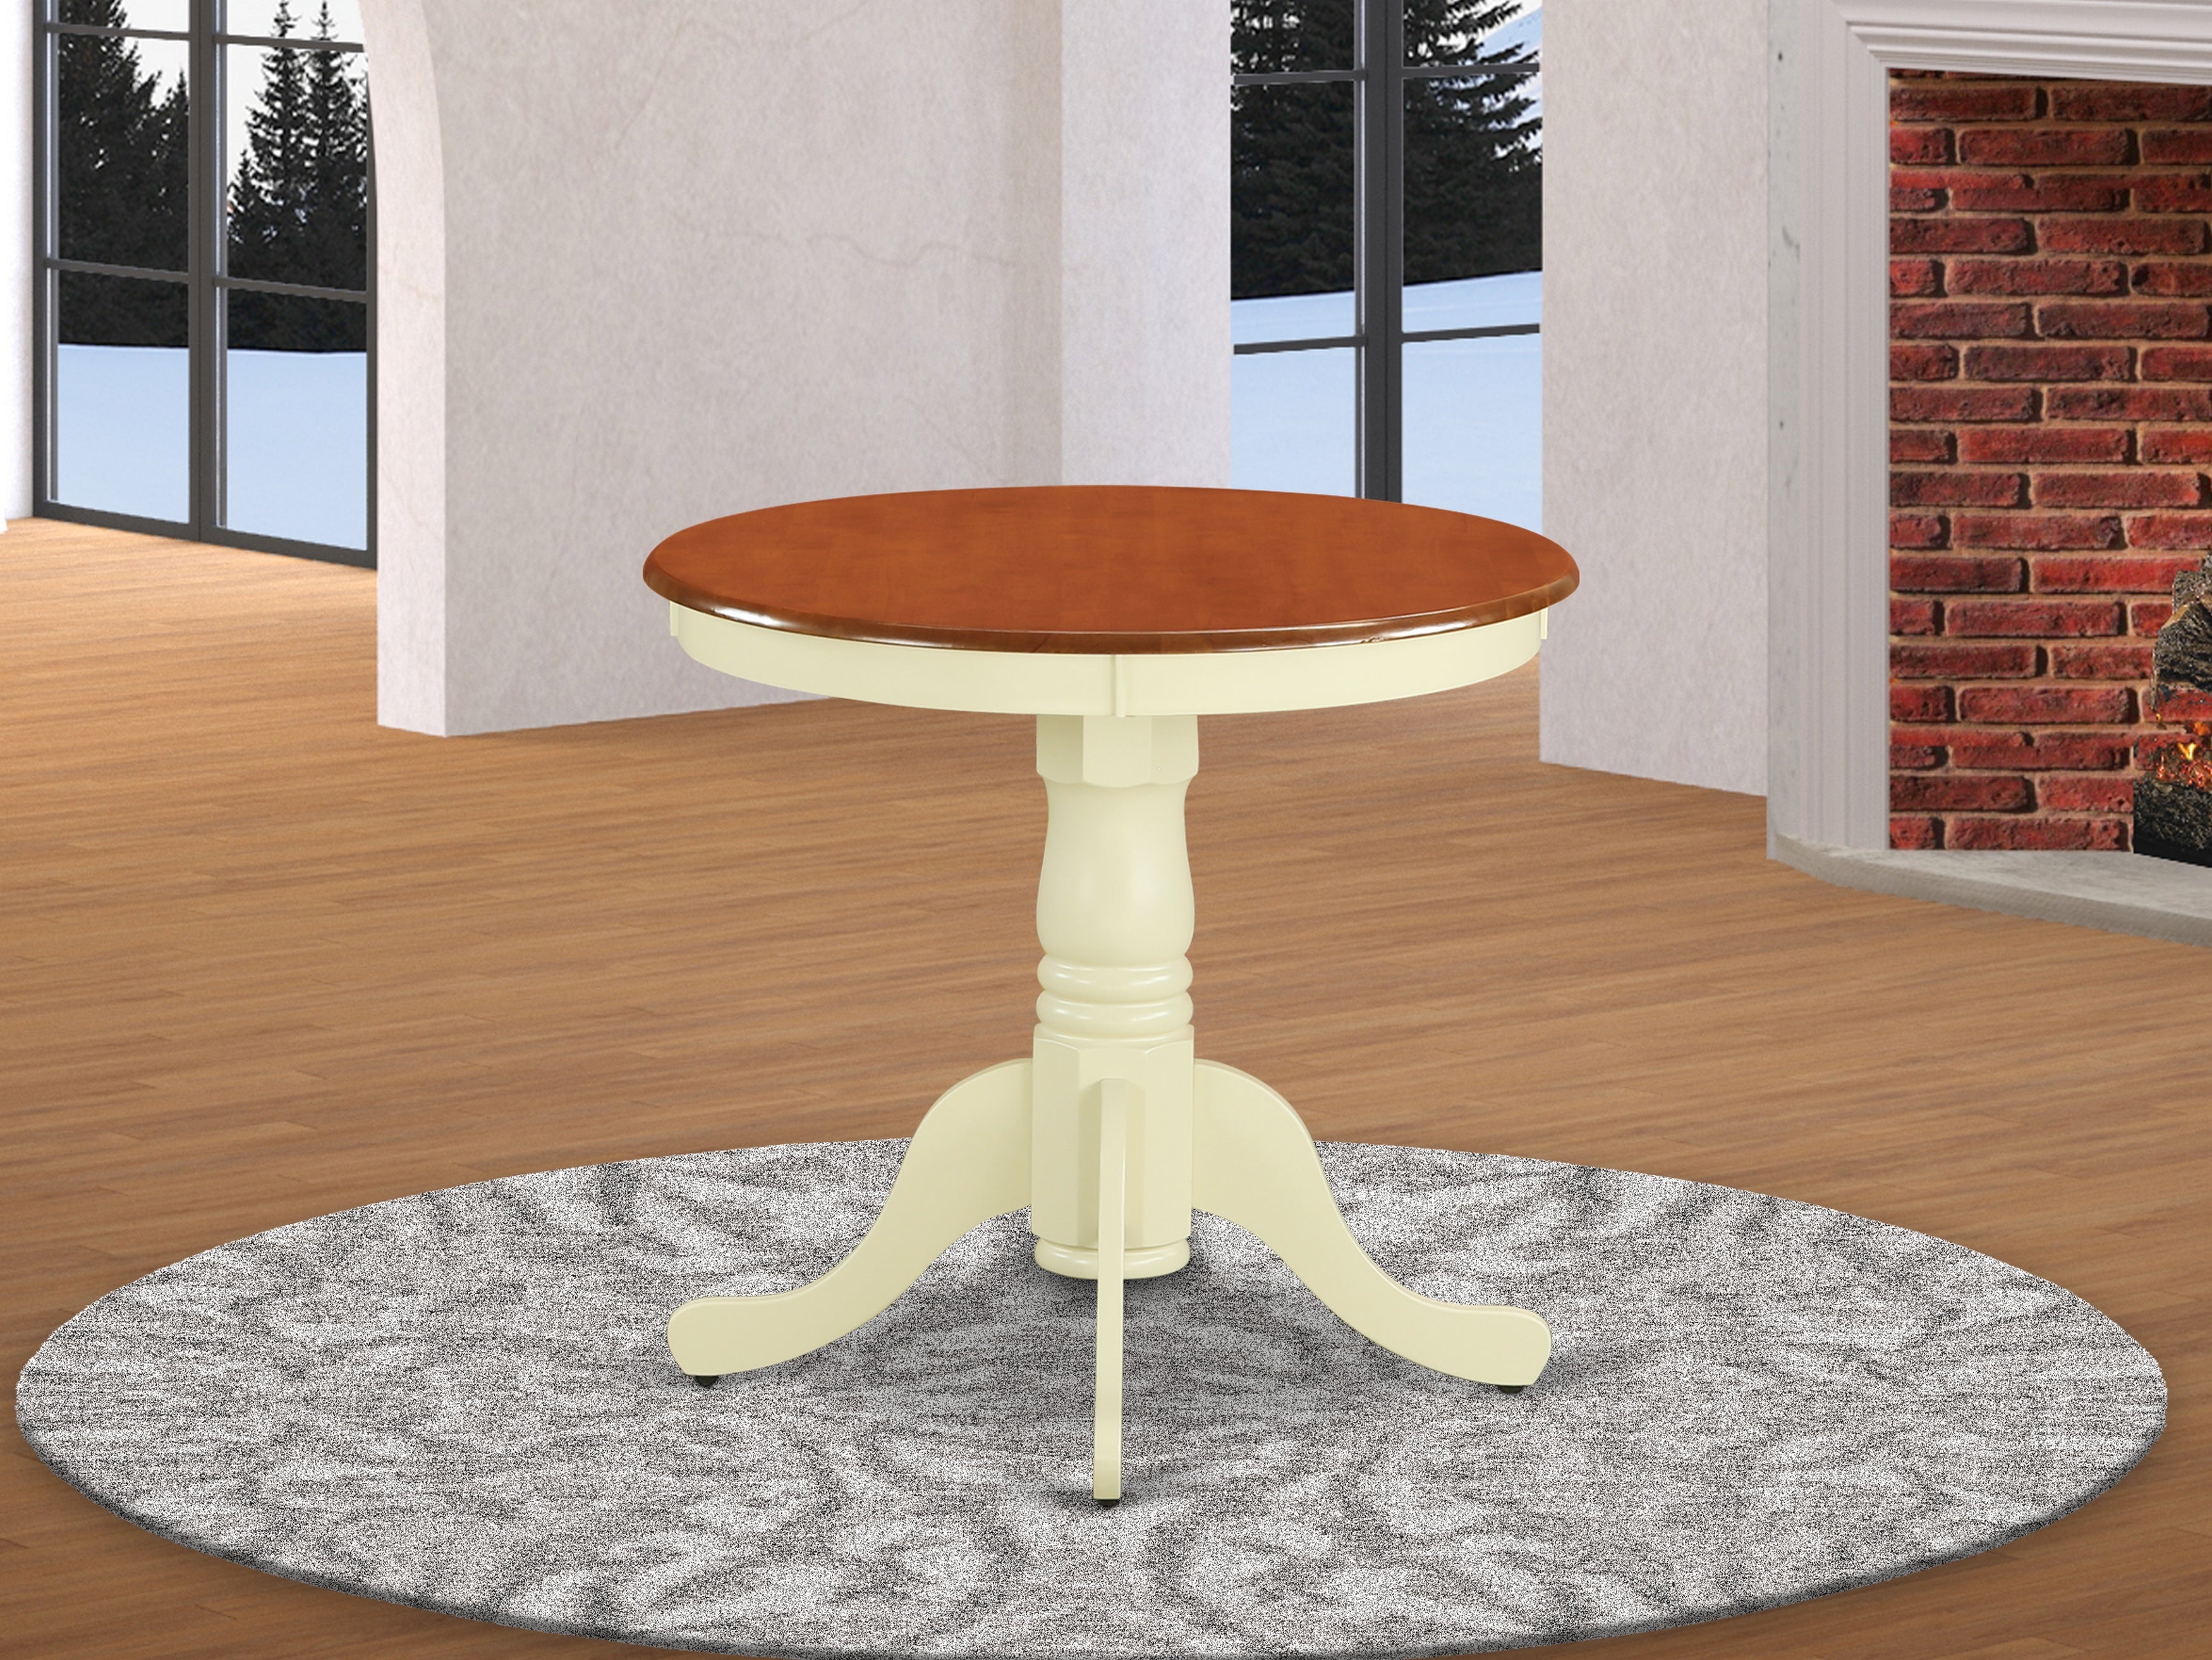 EMT-BMK-TP Edan Dining Table Made of Rubber Wood, 30 Inch Round, Buttermilk and Cherry Finish